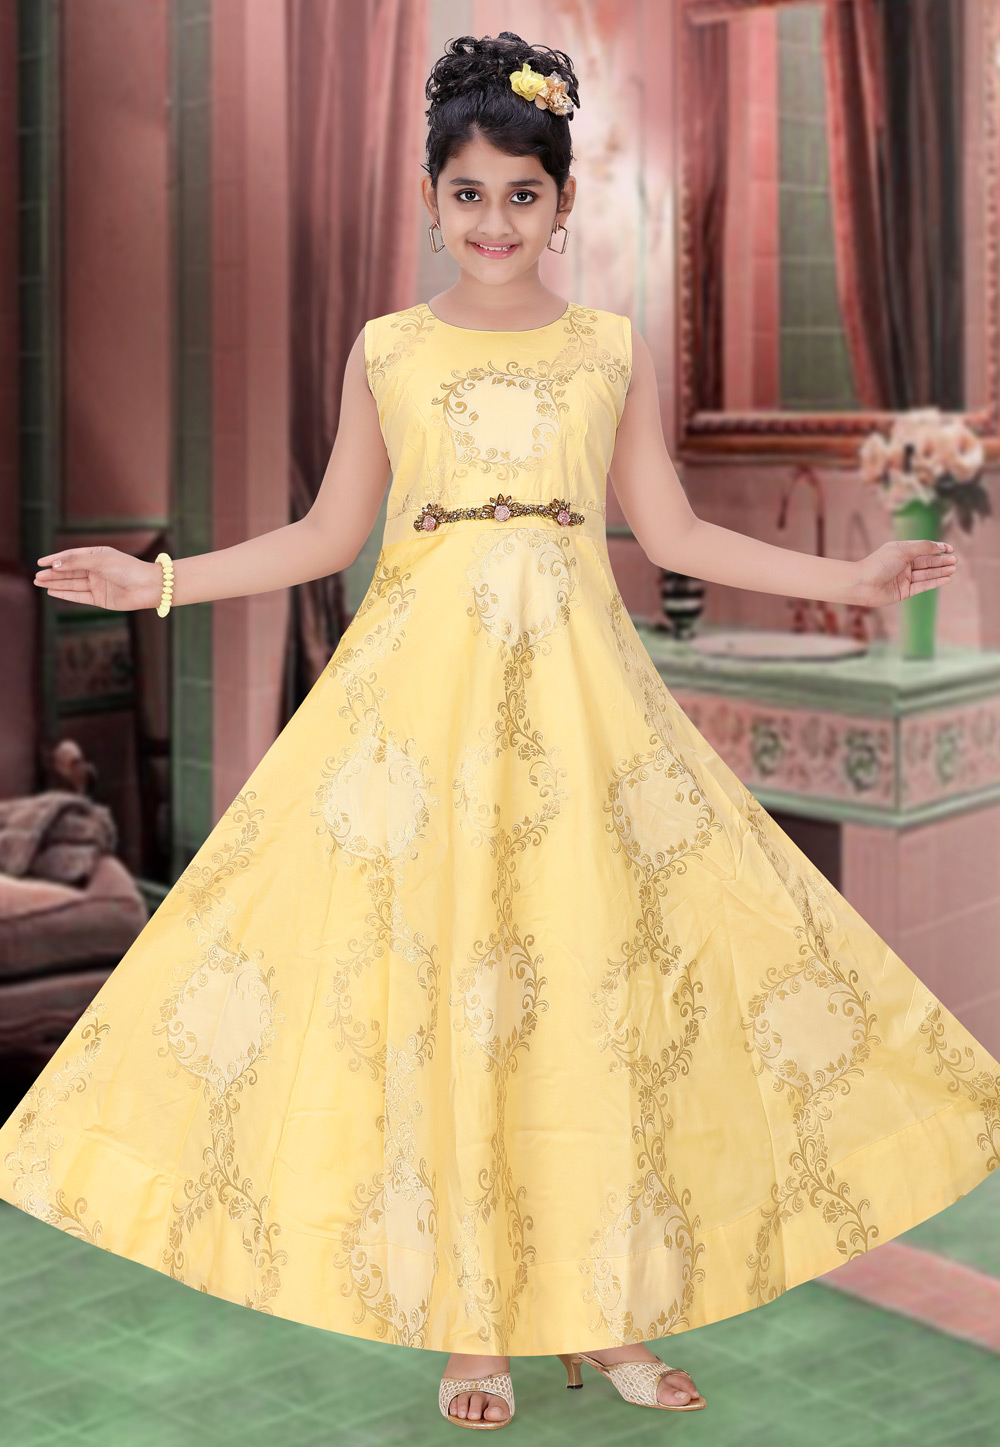 36 gowns and evening dresses for women to style: Design and create your  fashion style workbook. Dresses colouring book prime. Gown yellow dress:  Gowns ... stylist Workbook/Coloring book for girls: DESIGN, AMH: